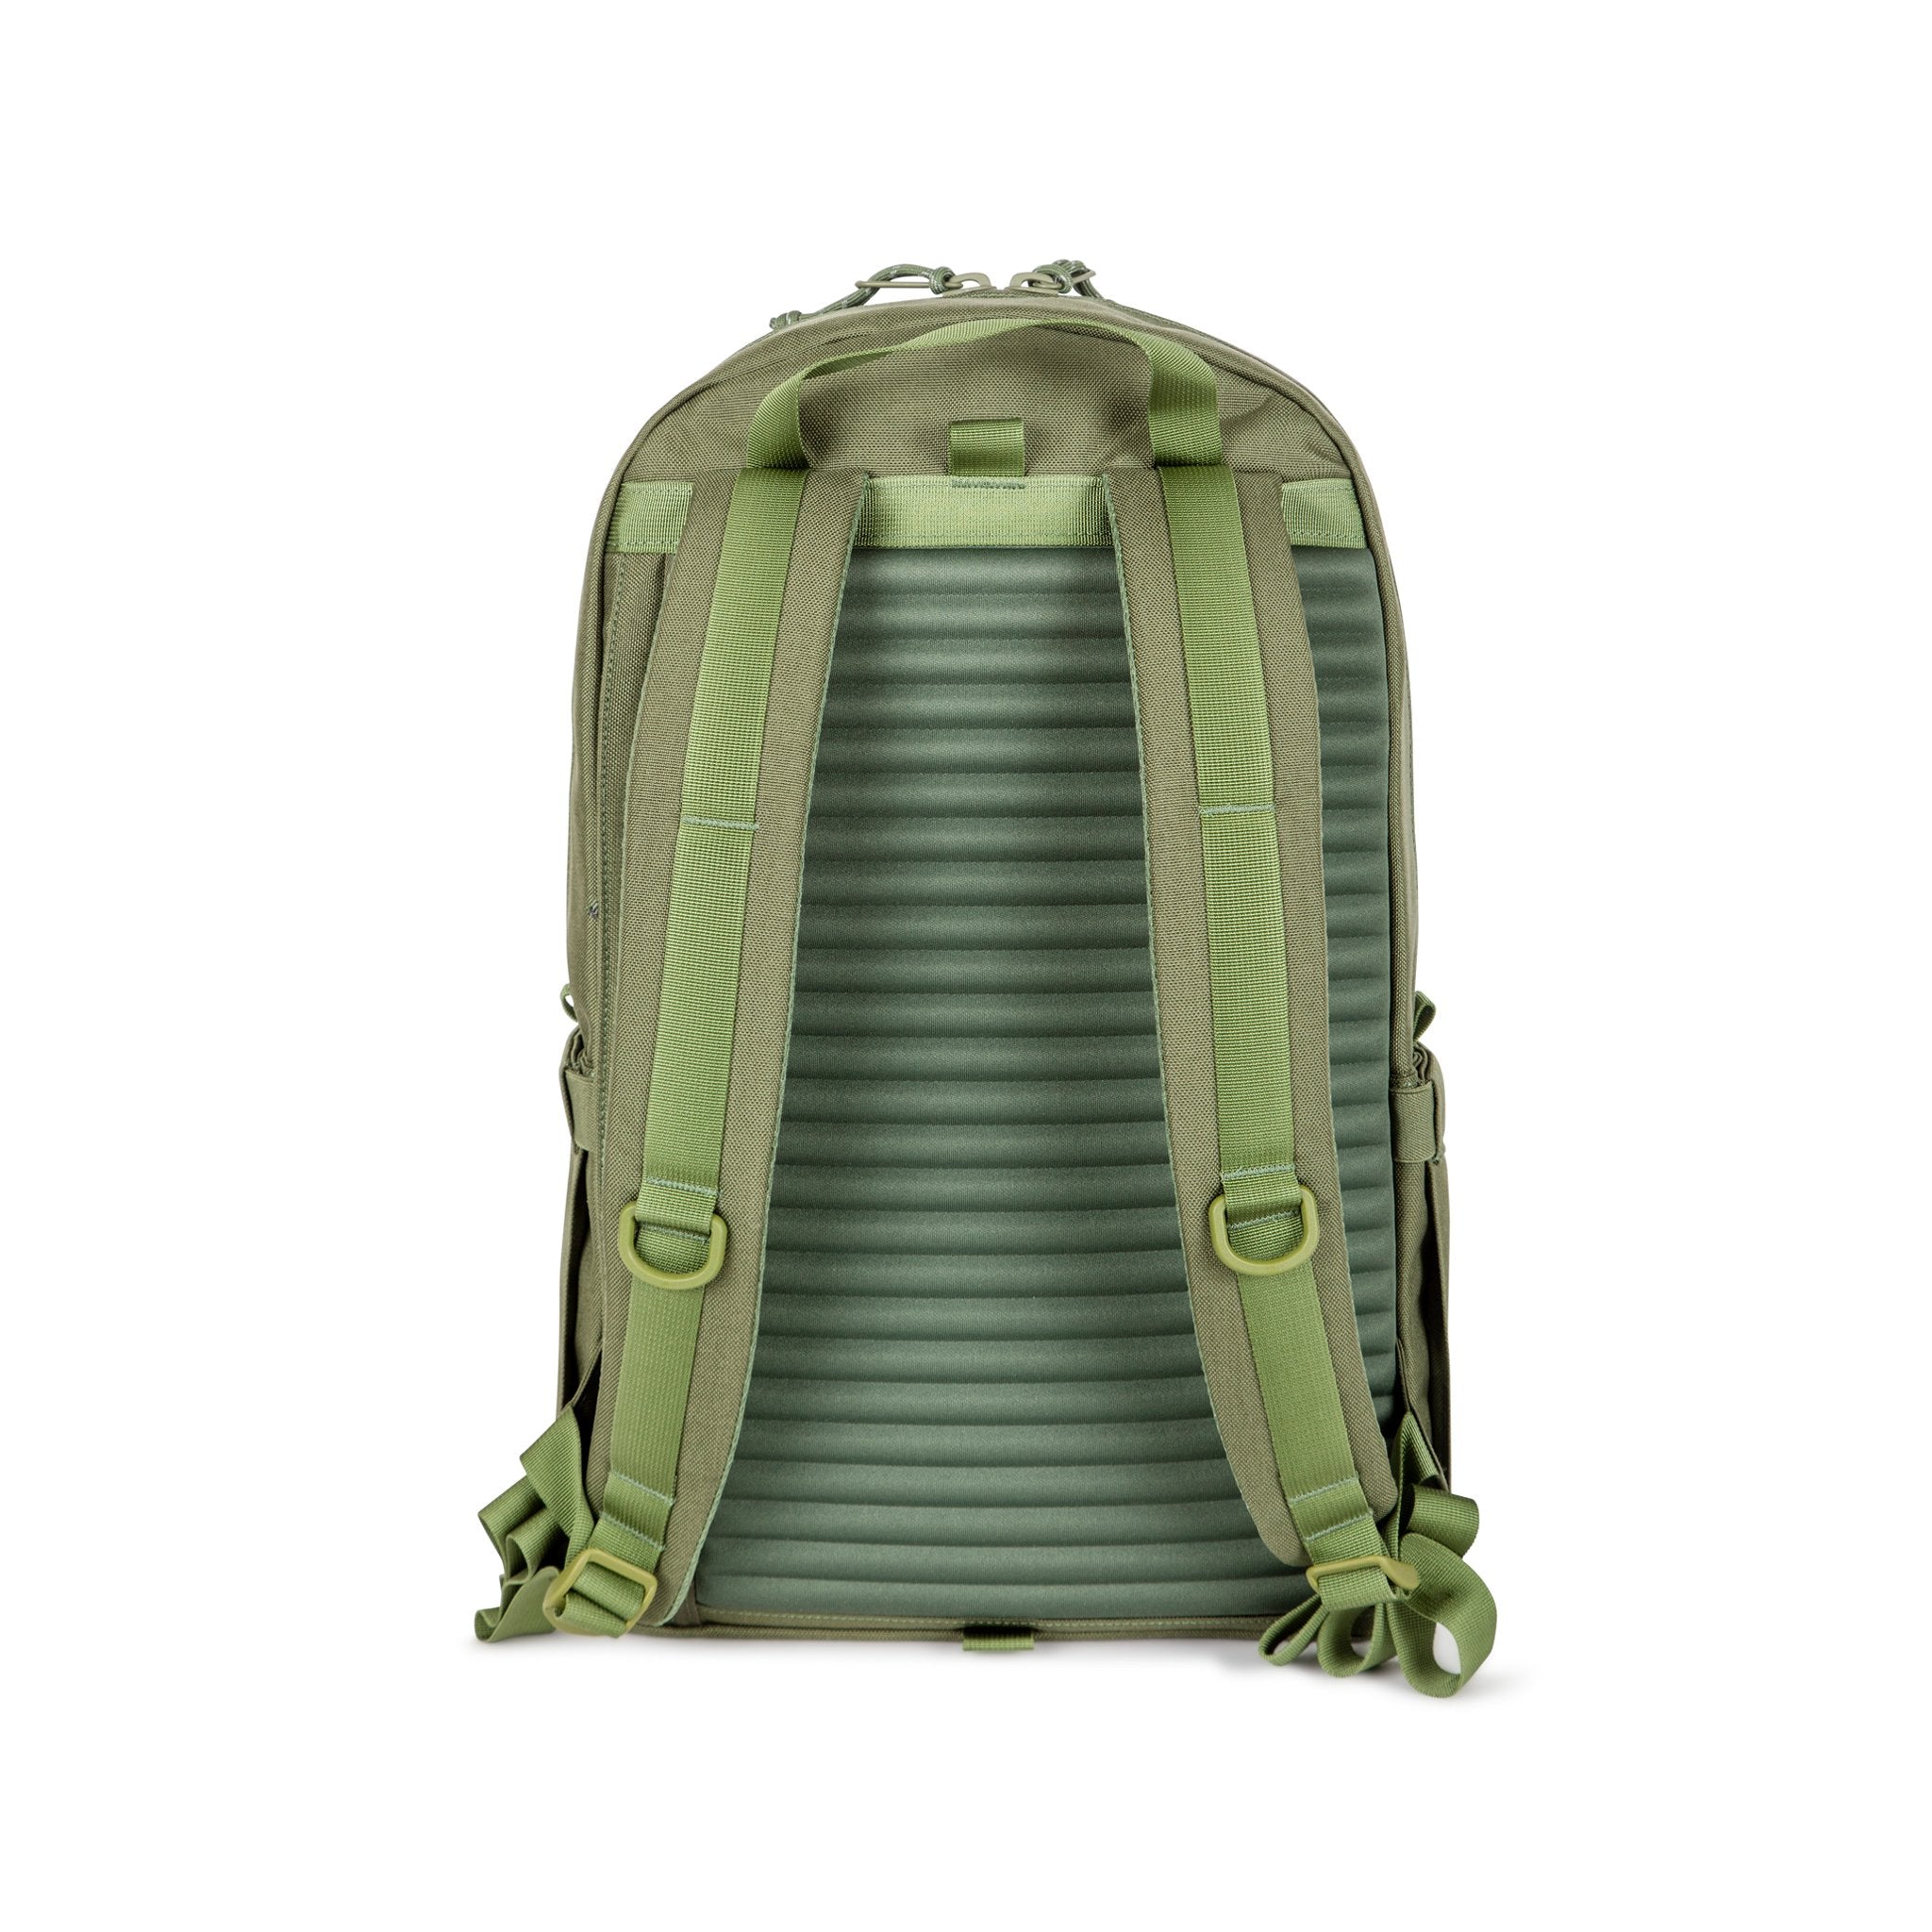 Padded RidgeBack™️ back panel and straps on Topo Designs Daypack Tech 100% recycled nylon backpack with external laptop access in "Olive" green.